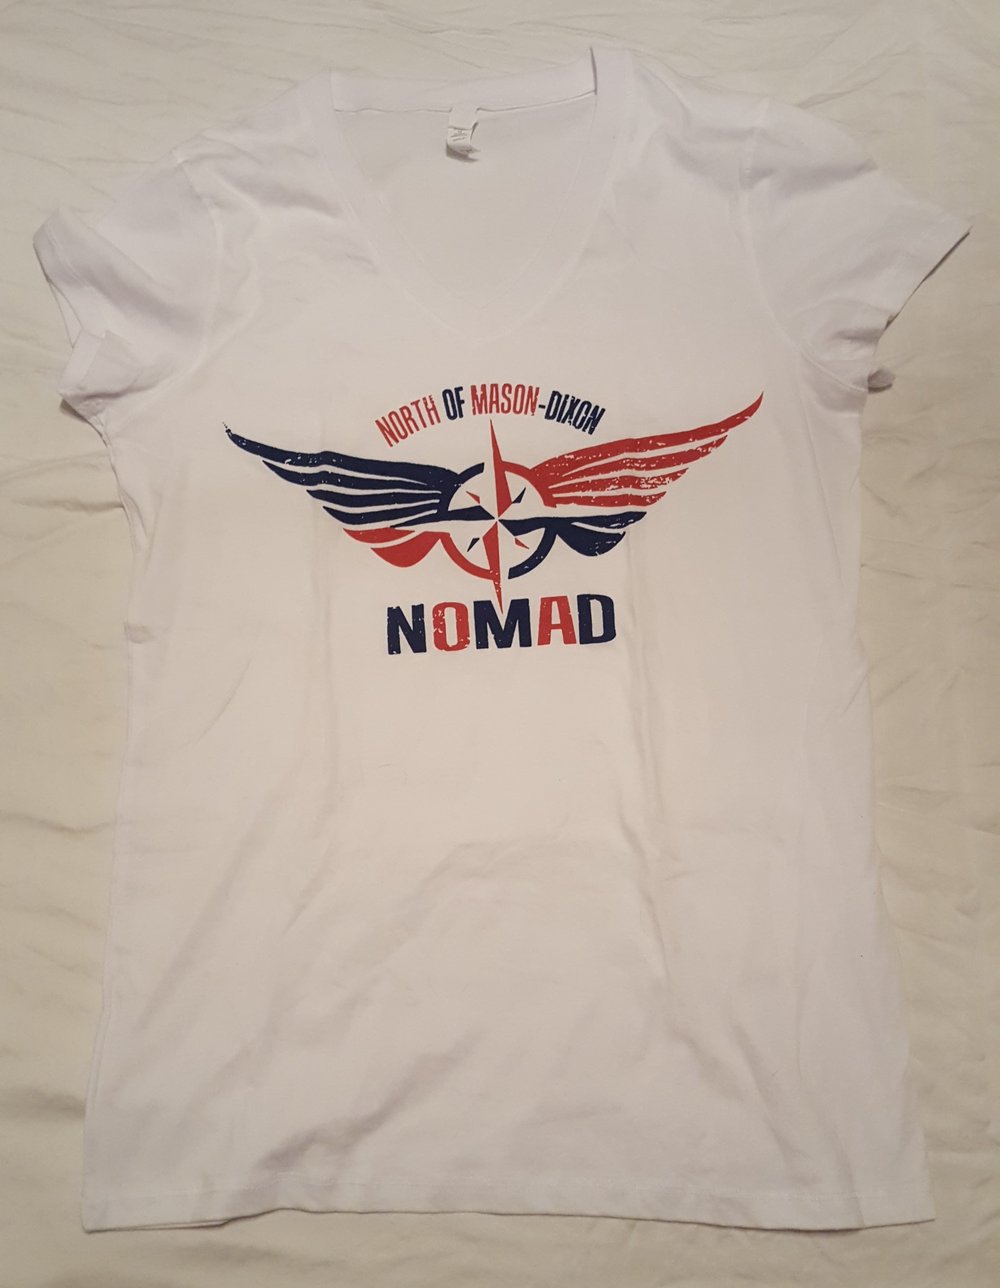 NOMaD Ladies Red White and Blue T-Shirt